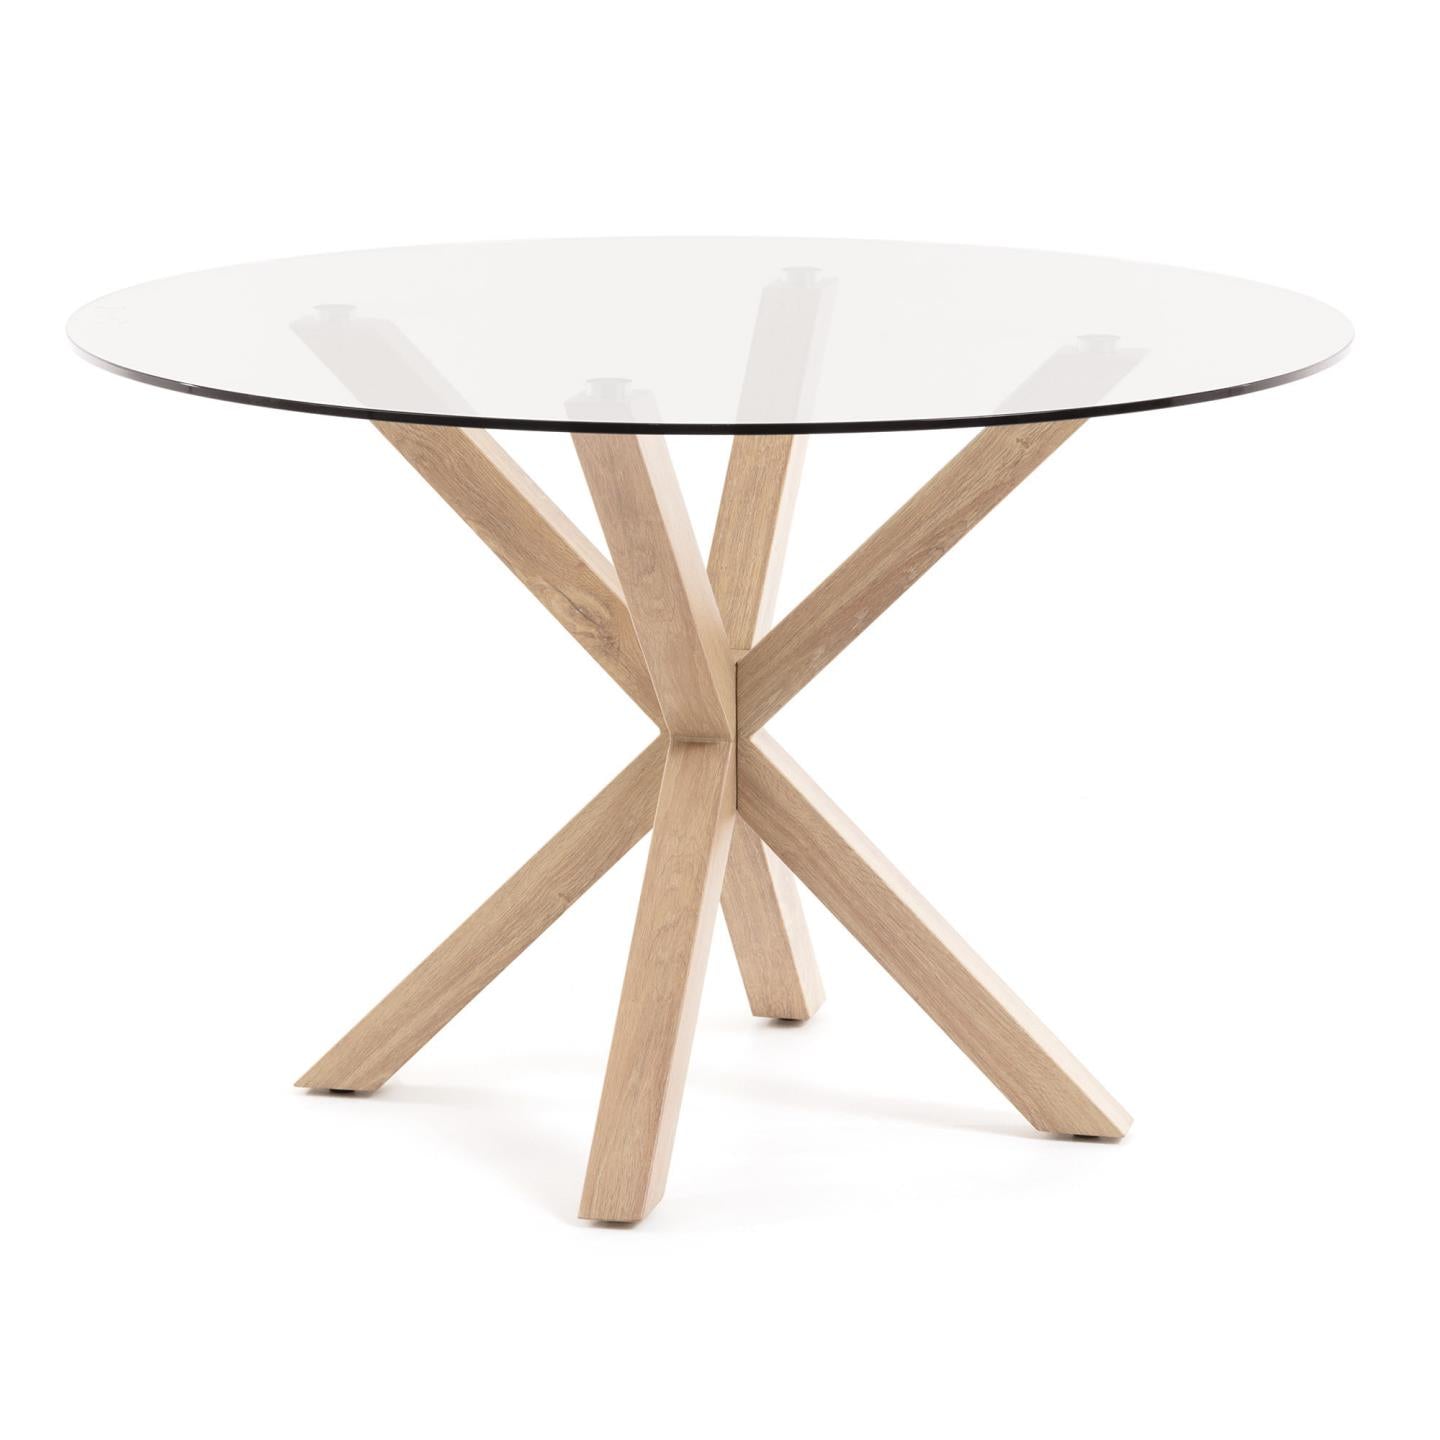 Full Argo round glass table with steel legs with wood-effect finish Ø 119 cm